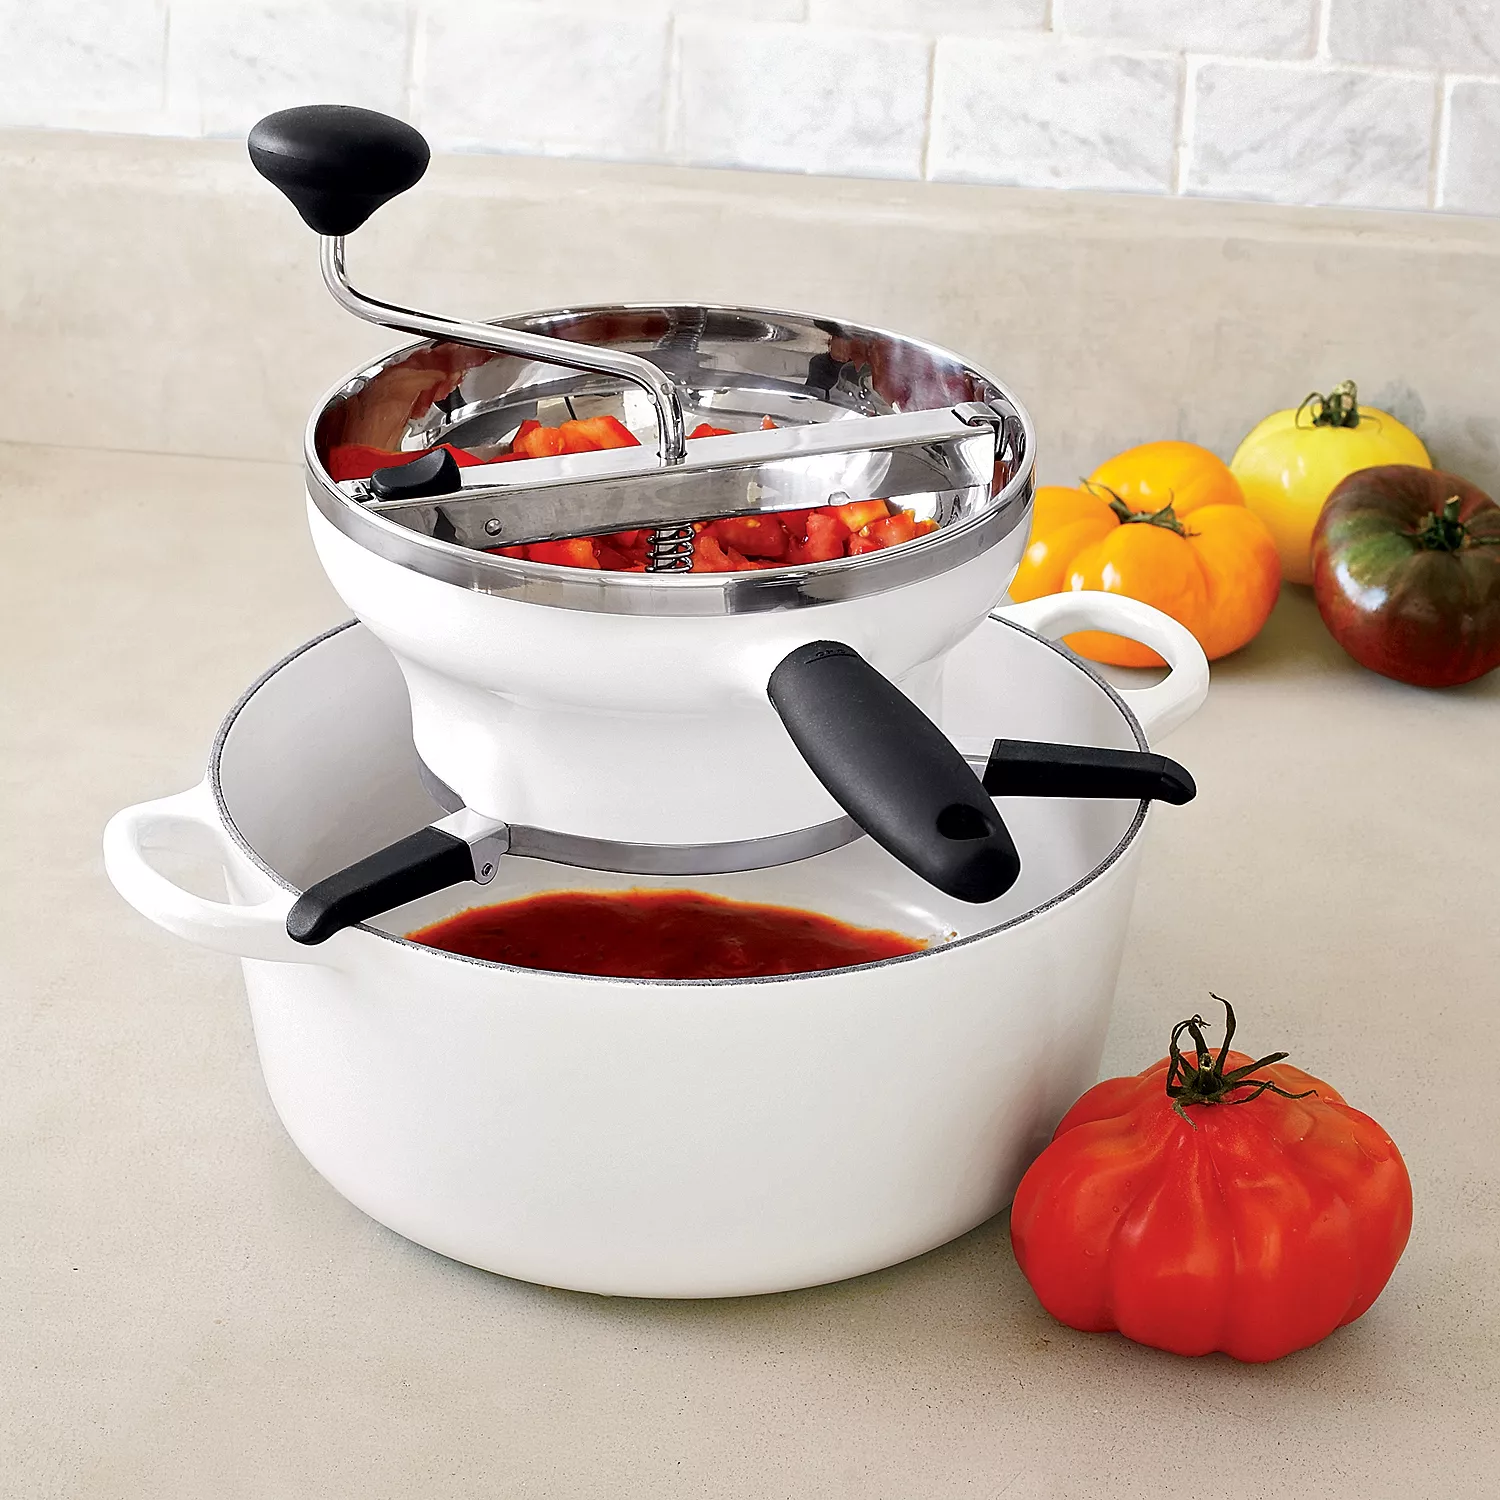 OXO Food Mill Stainless Hand Crank Foldable Manual Processor